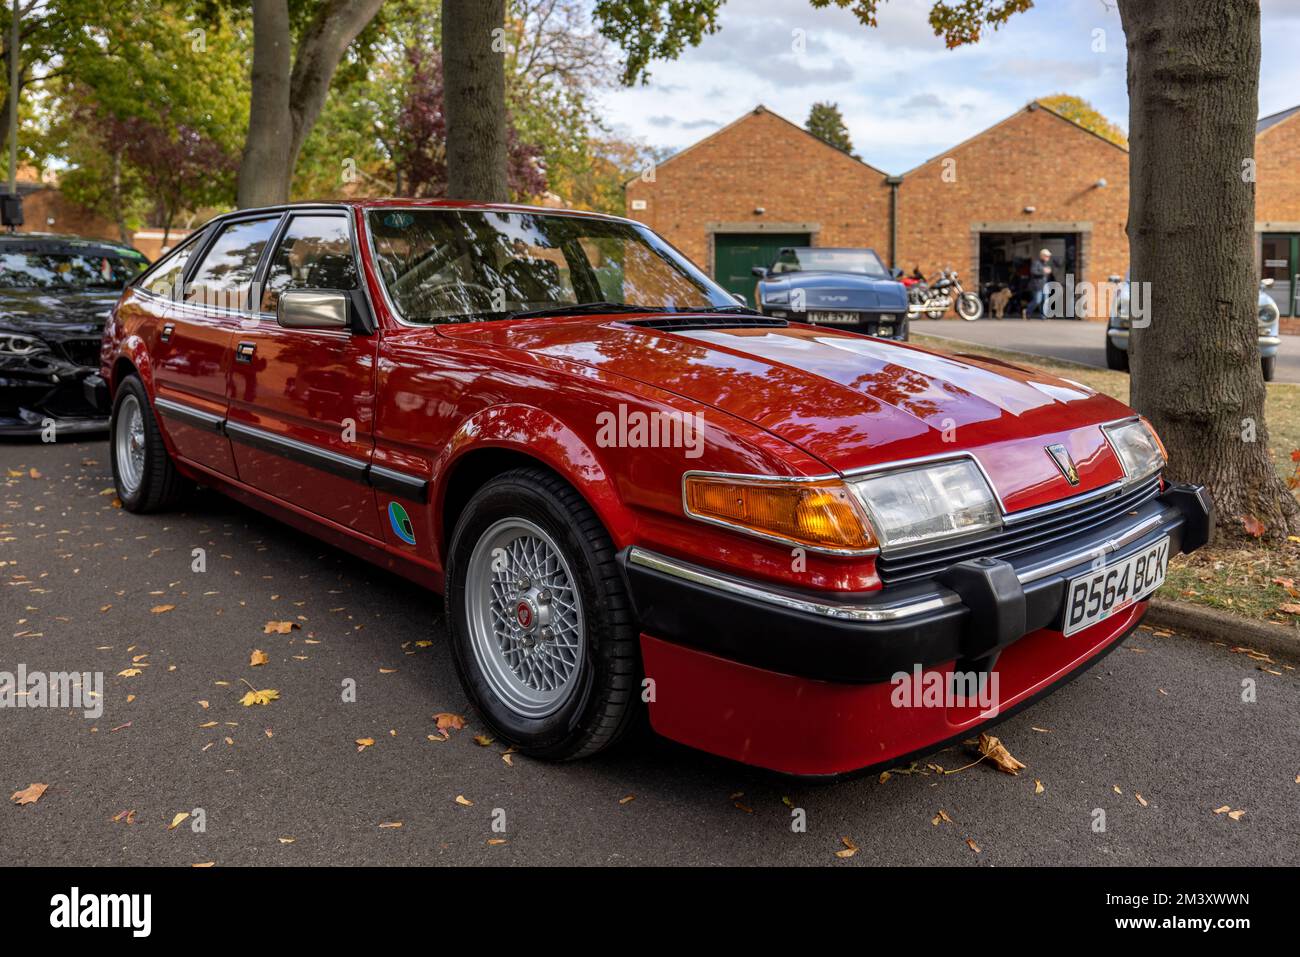 1985 Rover Vitesse ‘B564 BCK’ on display at the October Scramble held at the Bicester Heritage Centre on the 9th October 2022. Stock Photo